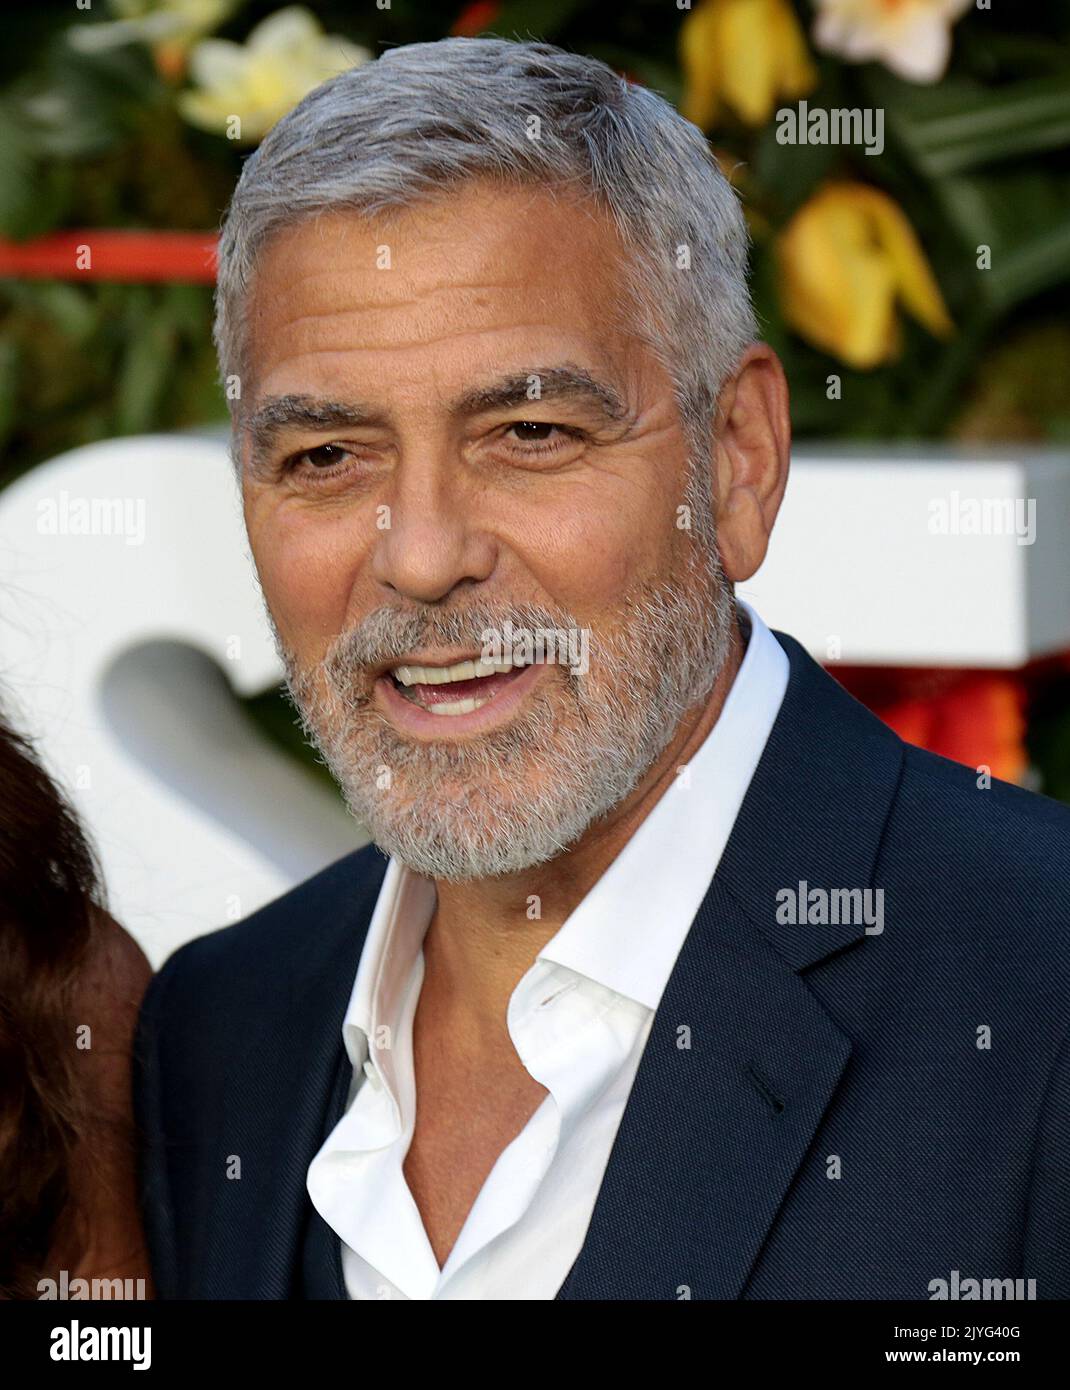 Sep 07, 2022 - London, England, UK - George Clooney attending Ticket to Paradise World Film Premiere, Odeon Luxe, Leicester Square Stock Photo